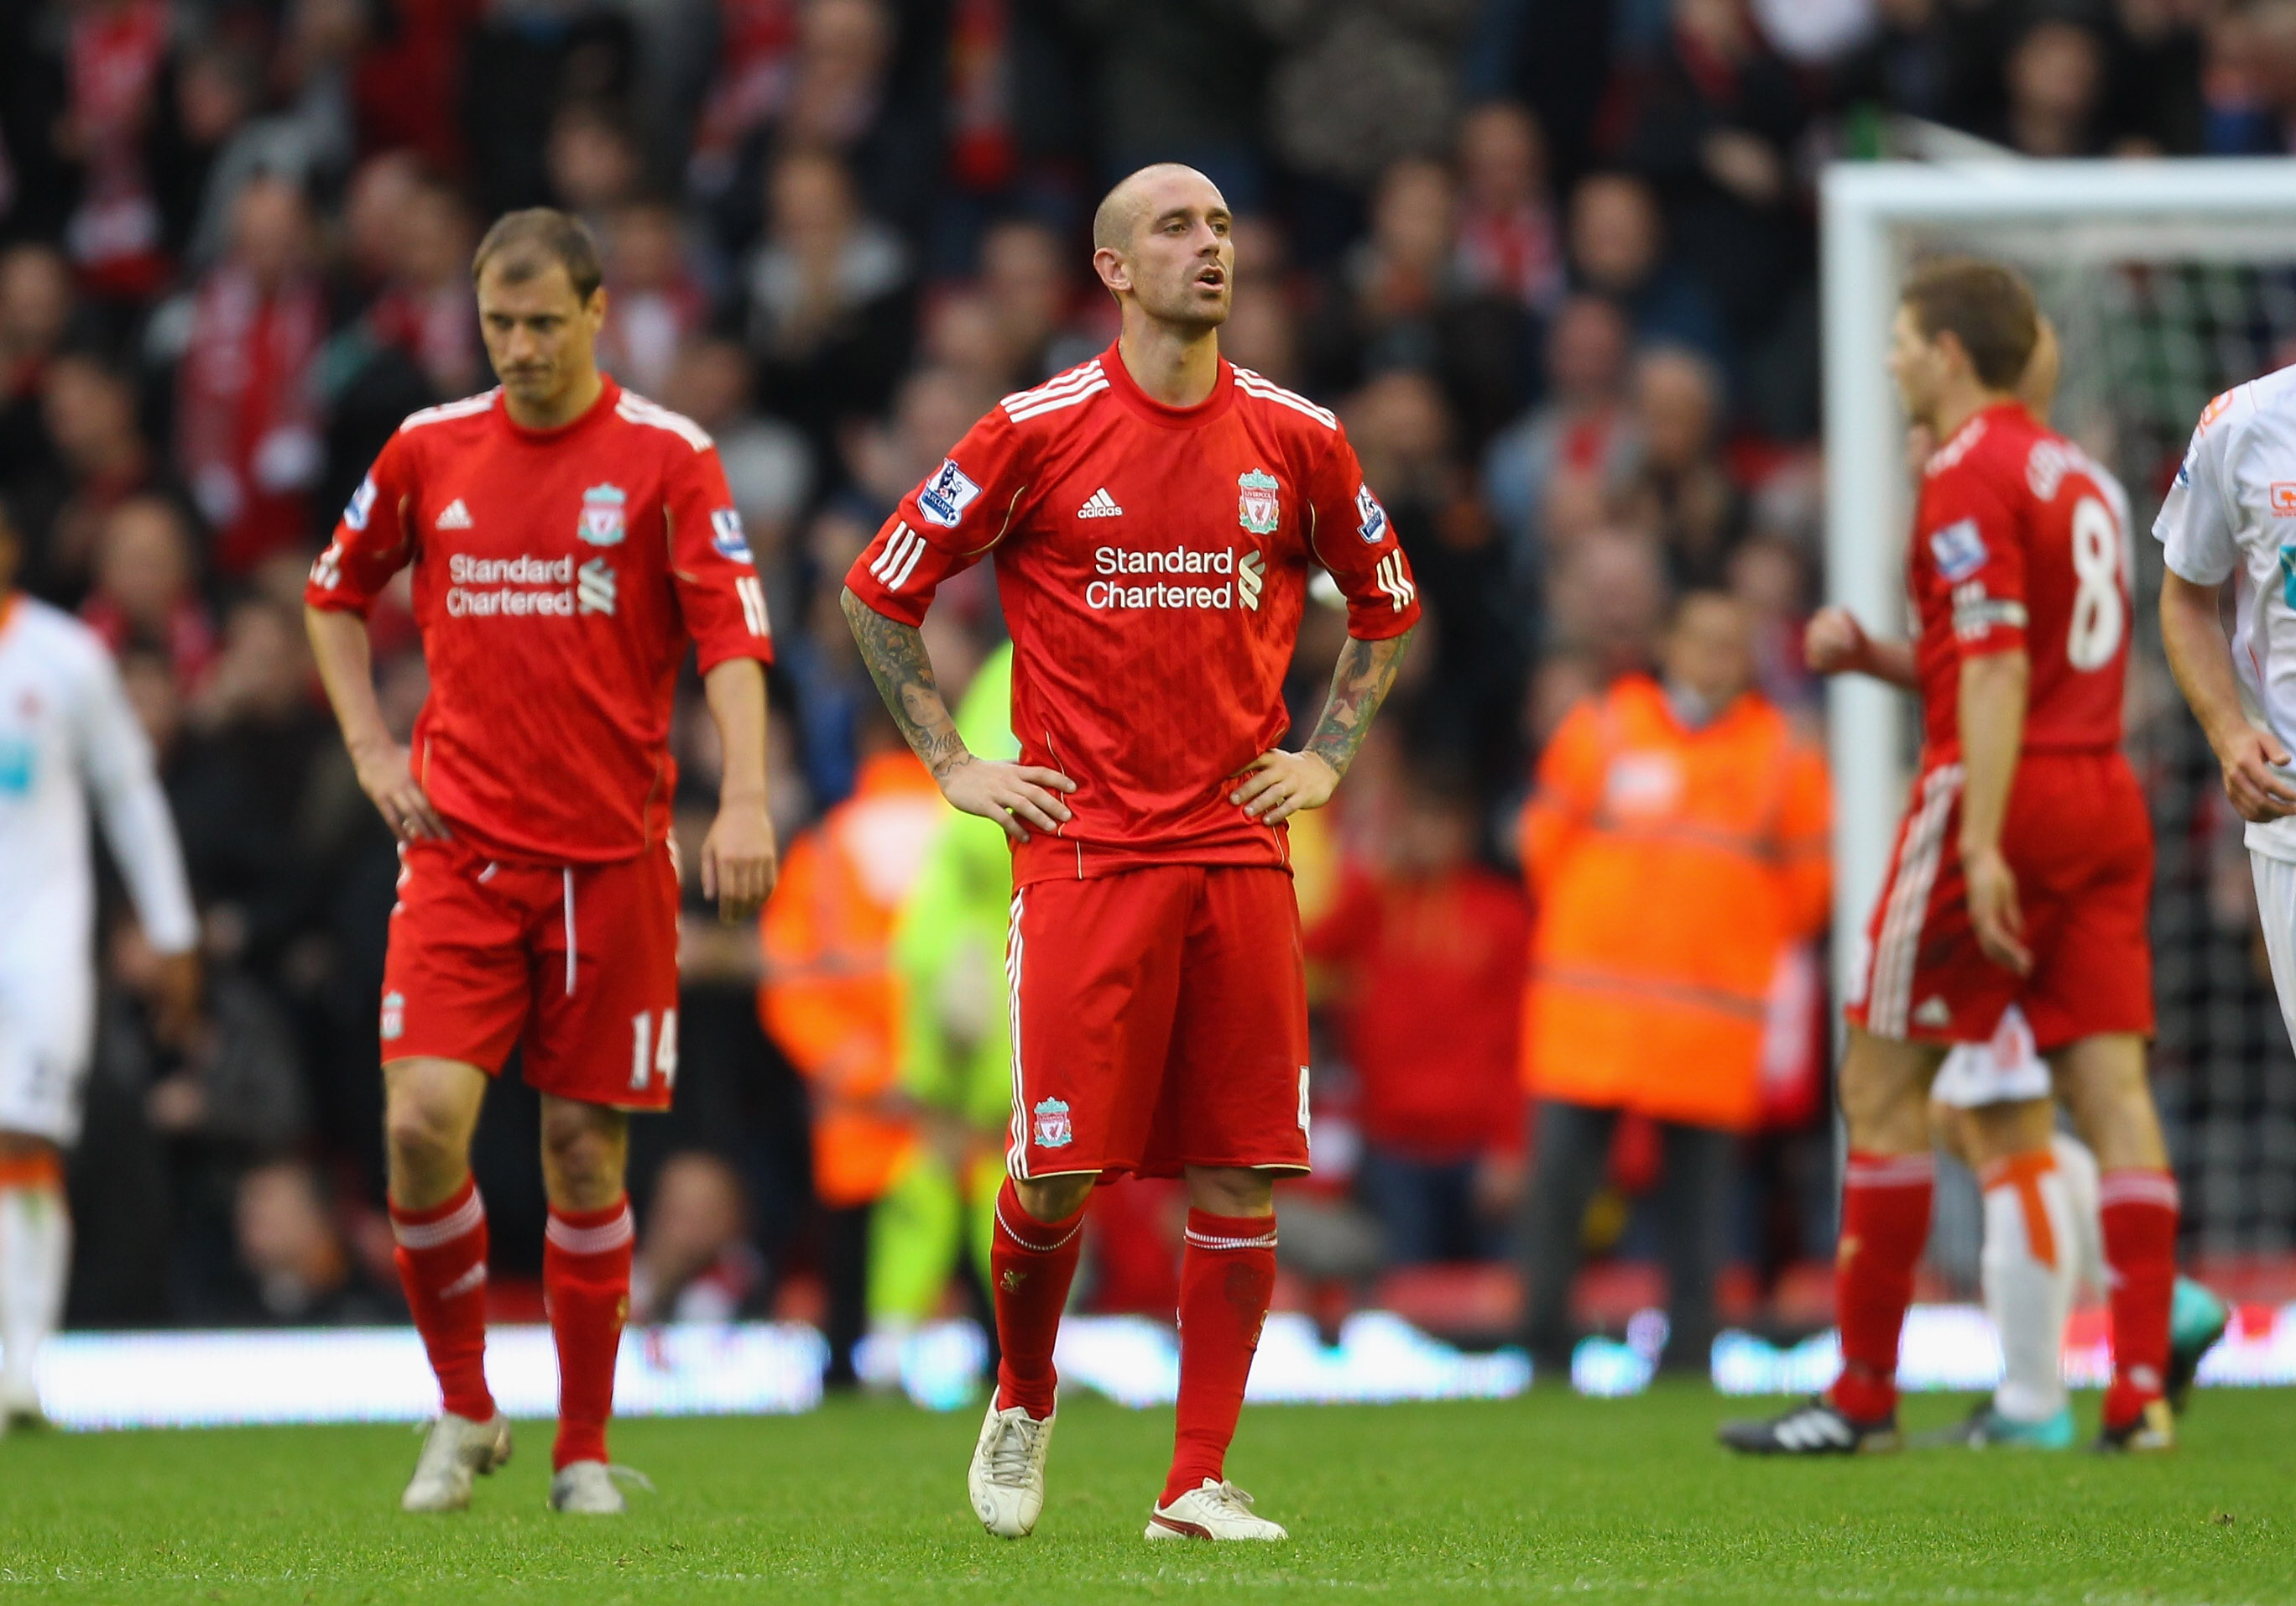 LIVERPOOL, ENGLAND - OCTOBER 03:  Raul Meireles of Liverpool looks dejected after defeat to Blackpool in the Barclays Premier League match between Liverpool and Blackpool at Anfield on October 3, 2010 in Liverpool, England.  (Photo by Alex Livesey/Getty I